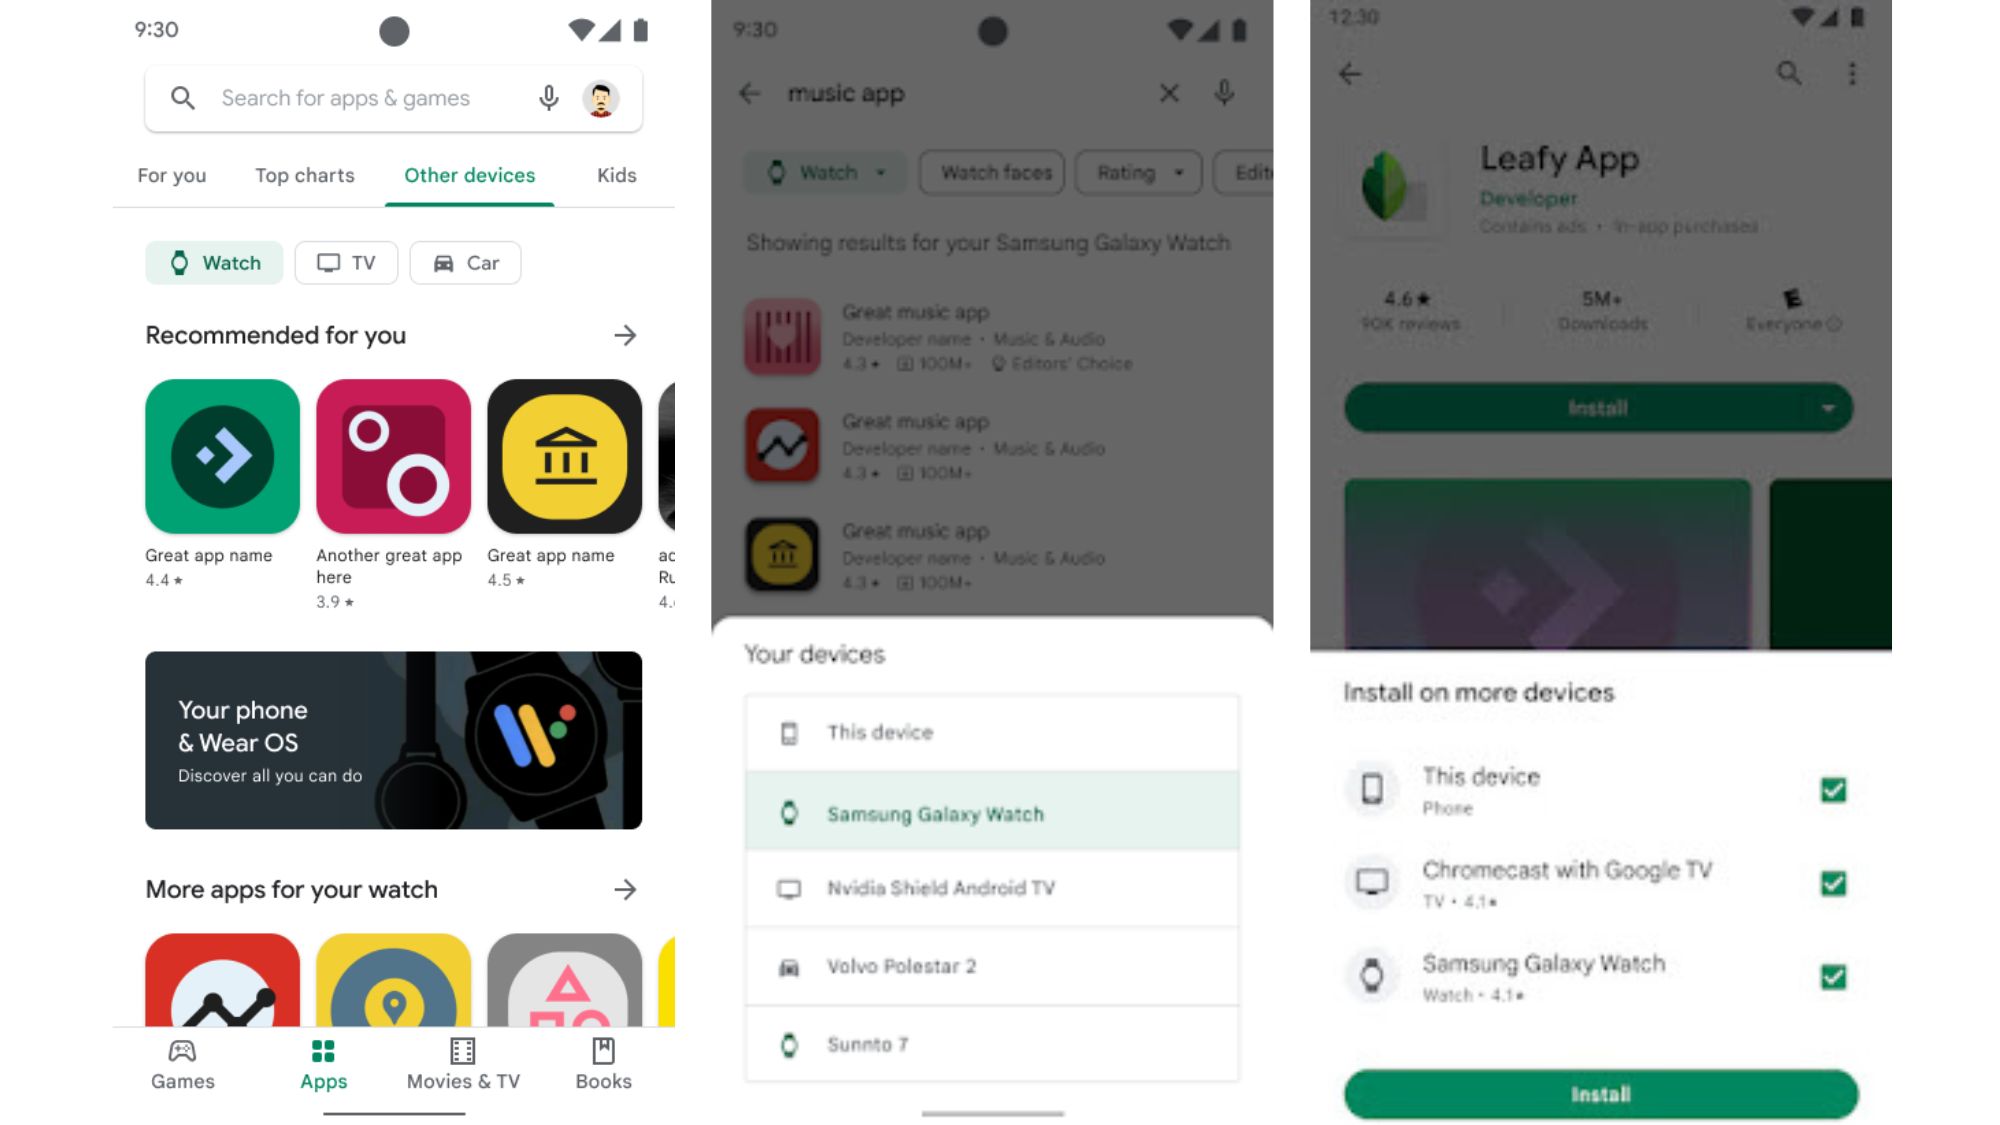 Google Play Store redesign